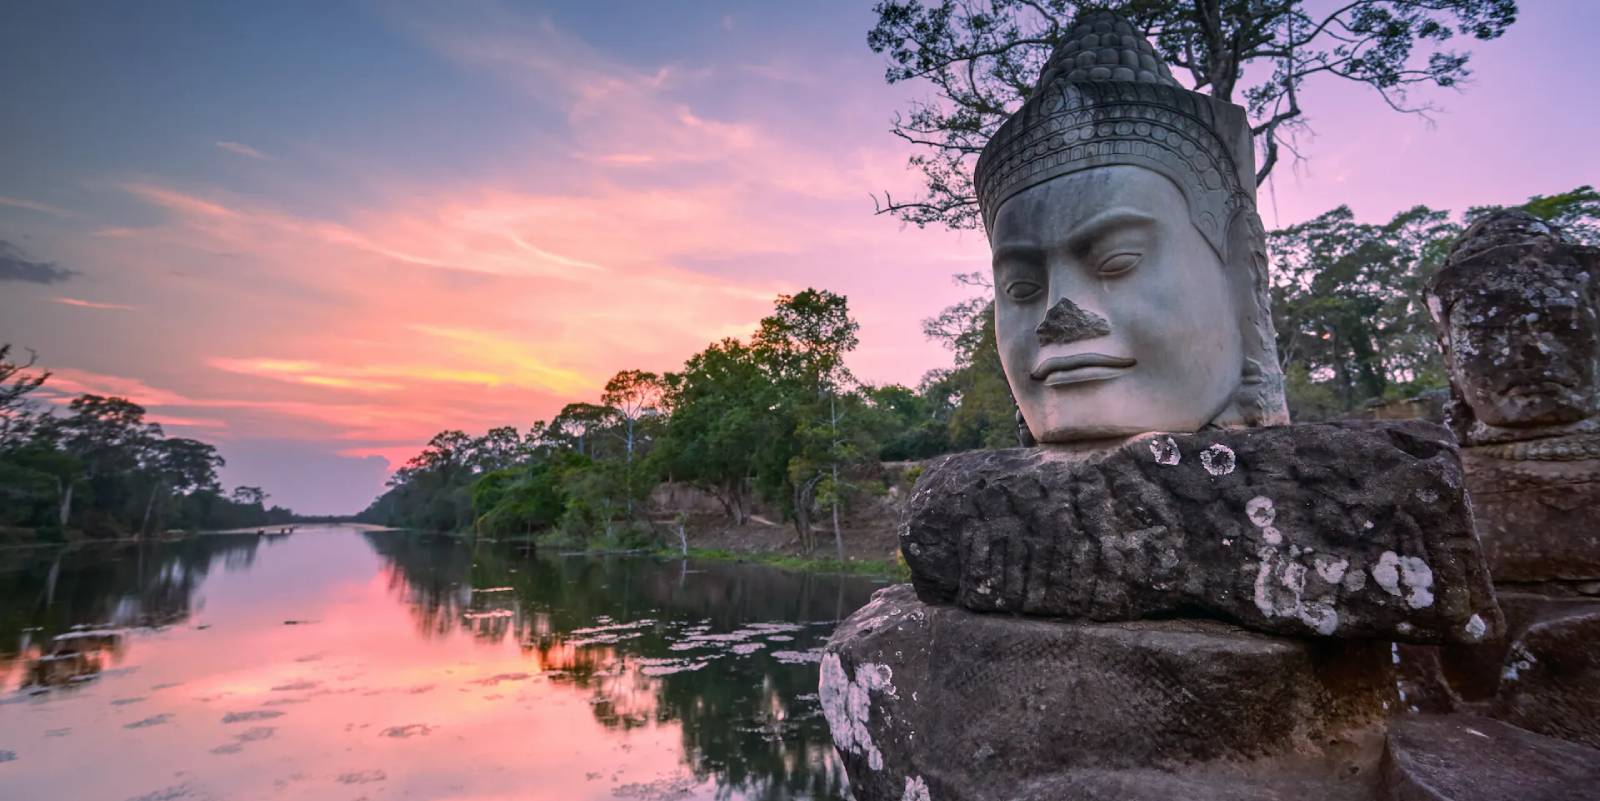 The best temples in Cambodia